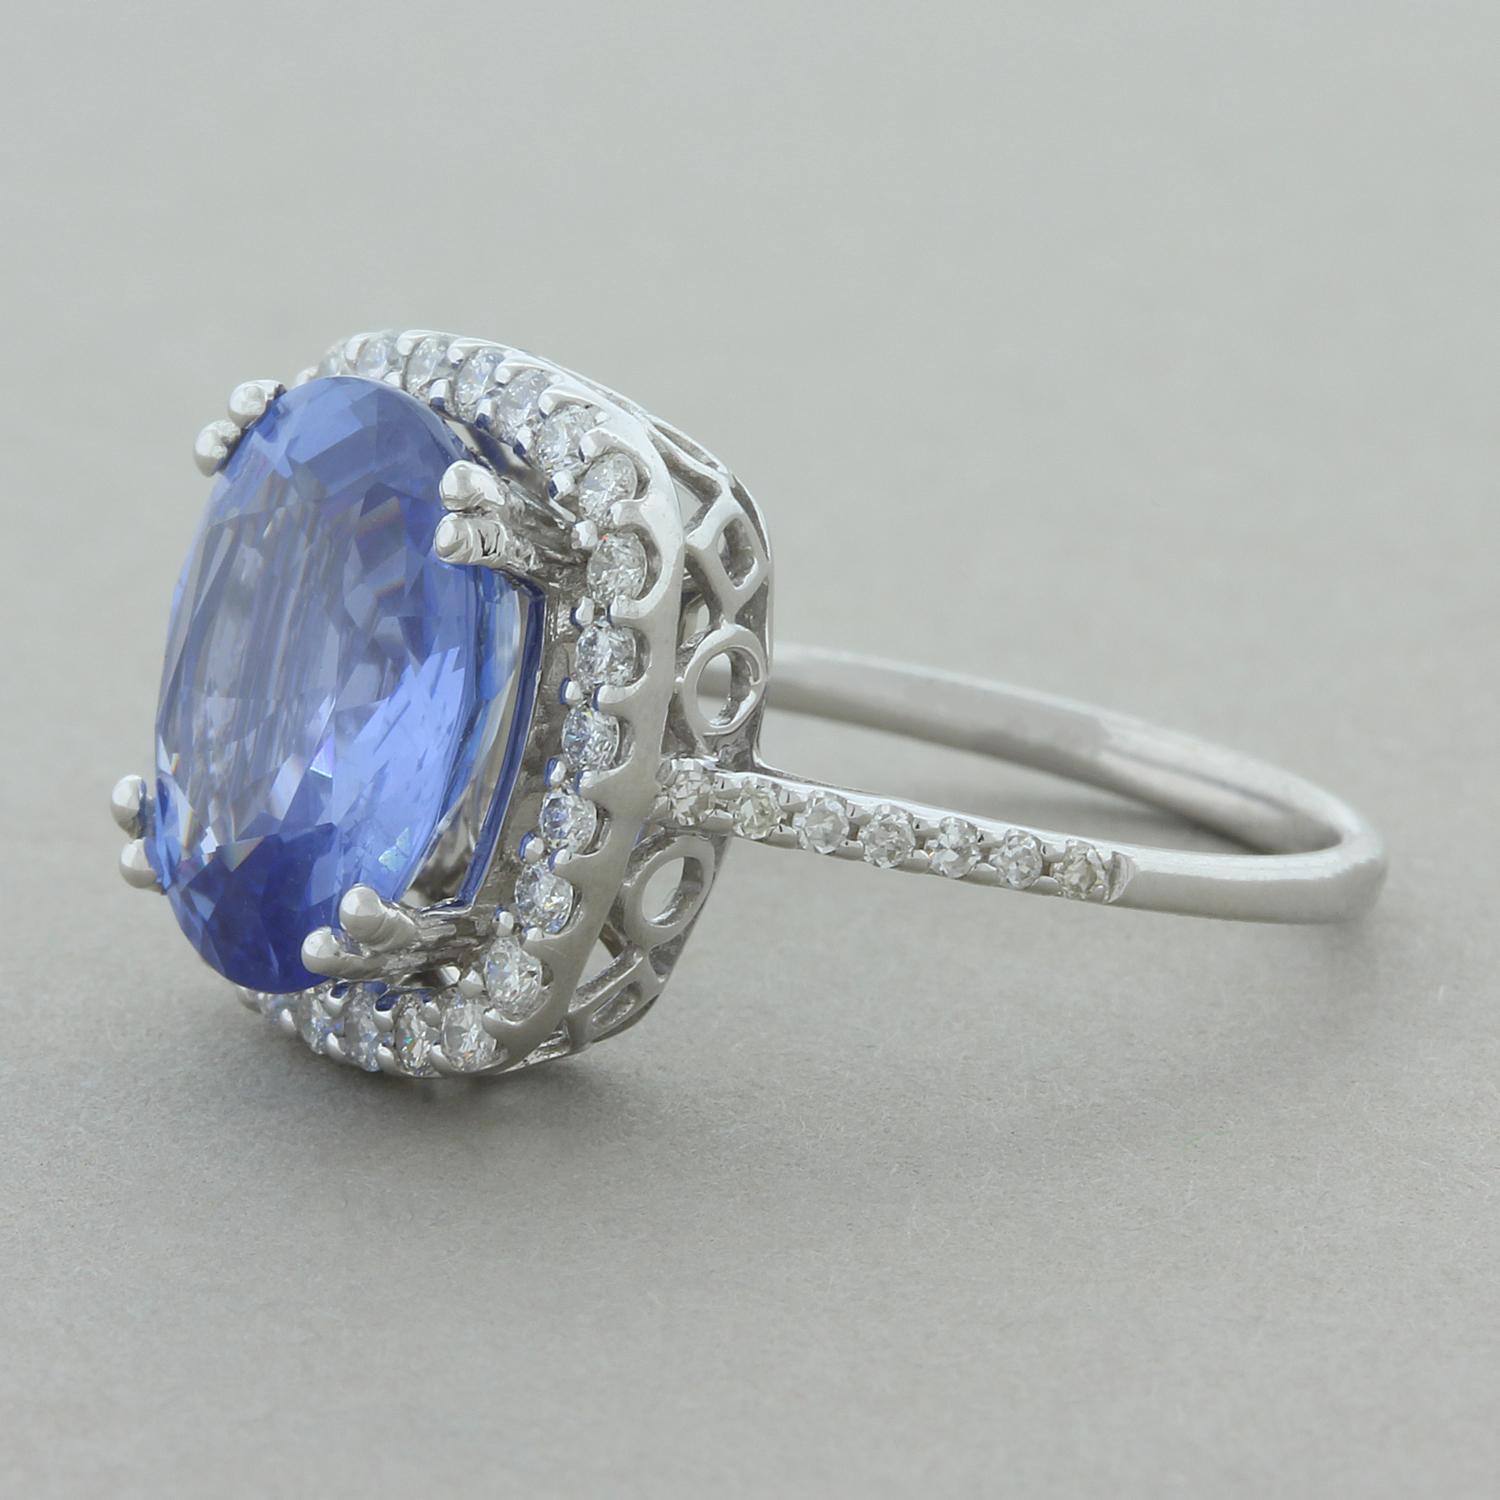 This ring features a natural 4.33 carat gem blue sapphire. The sapphire is certified as being unheated and untreated, less than 5% of stones mined stay untreated. It is haloed by round brilliant cut diamonds which also run along the shoulders on the